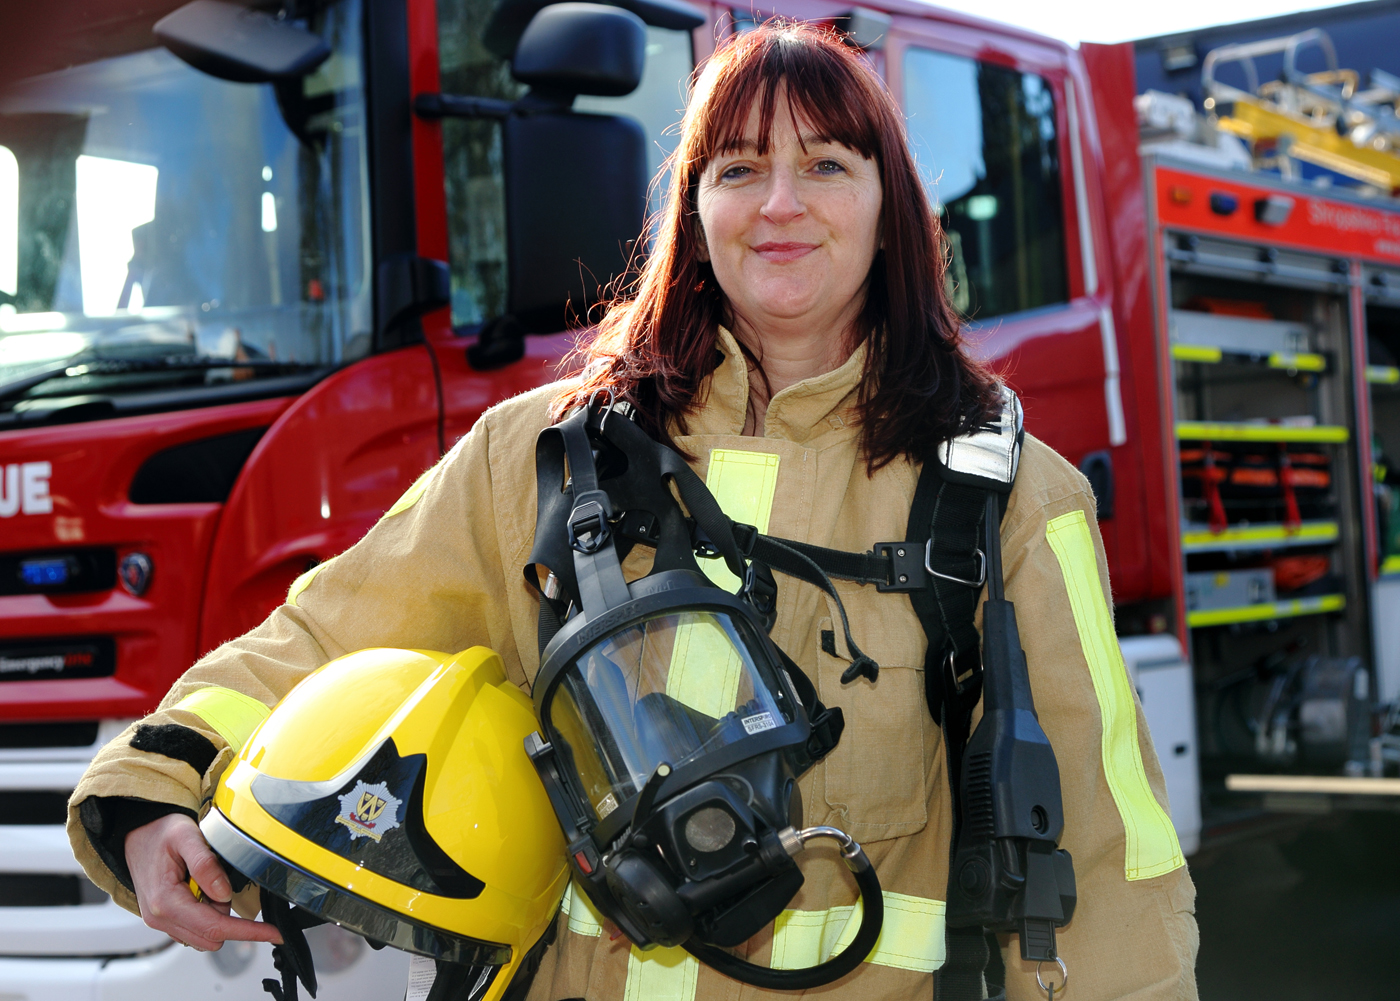 Women from across Shropshire who are interested in learning more about becoming "on call" firefighters attend a taster session at Oswestry Fire Station